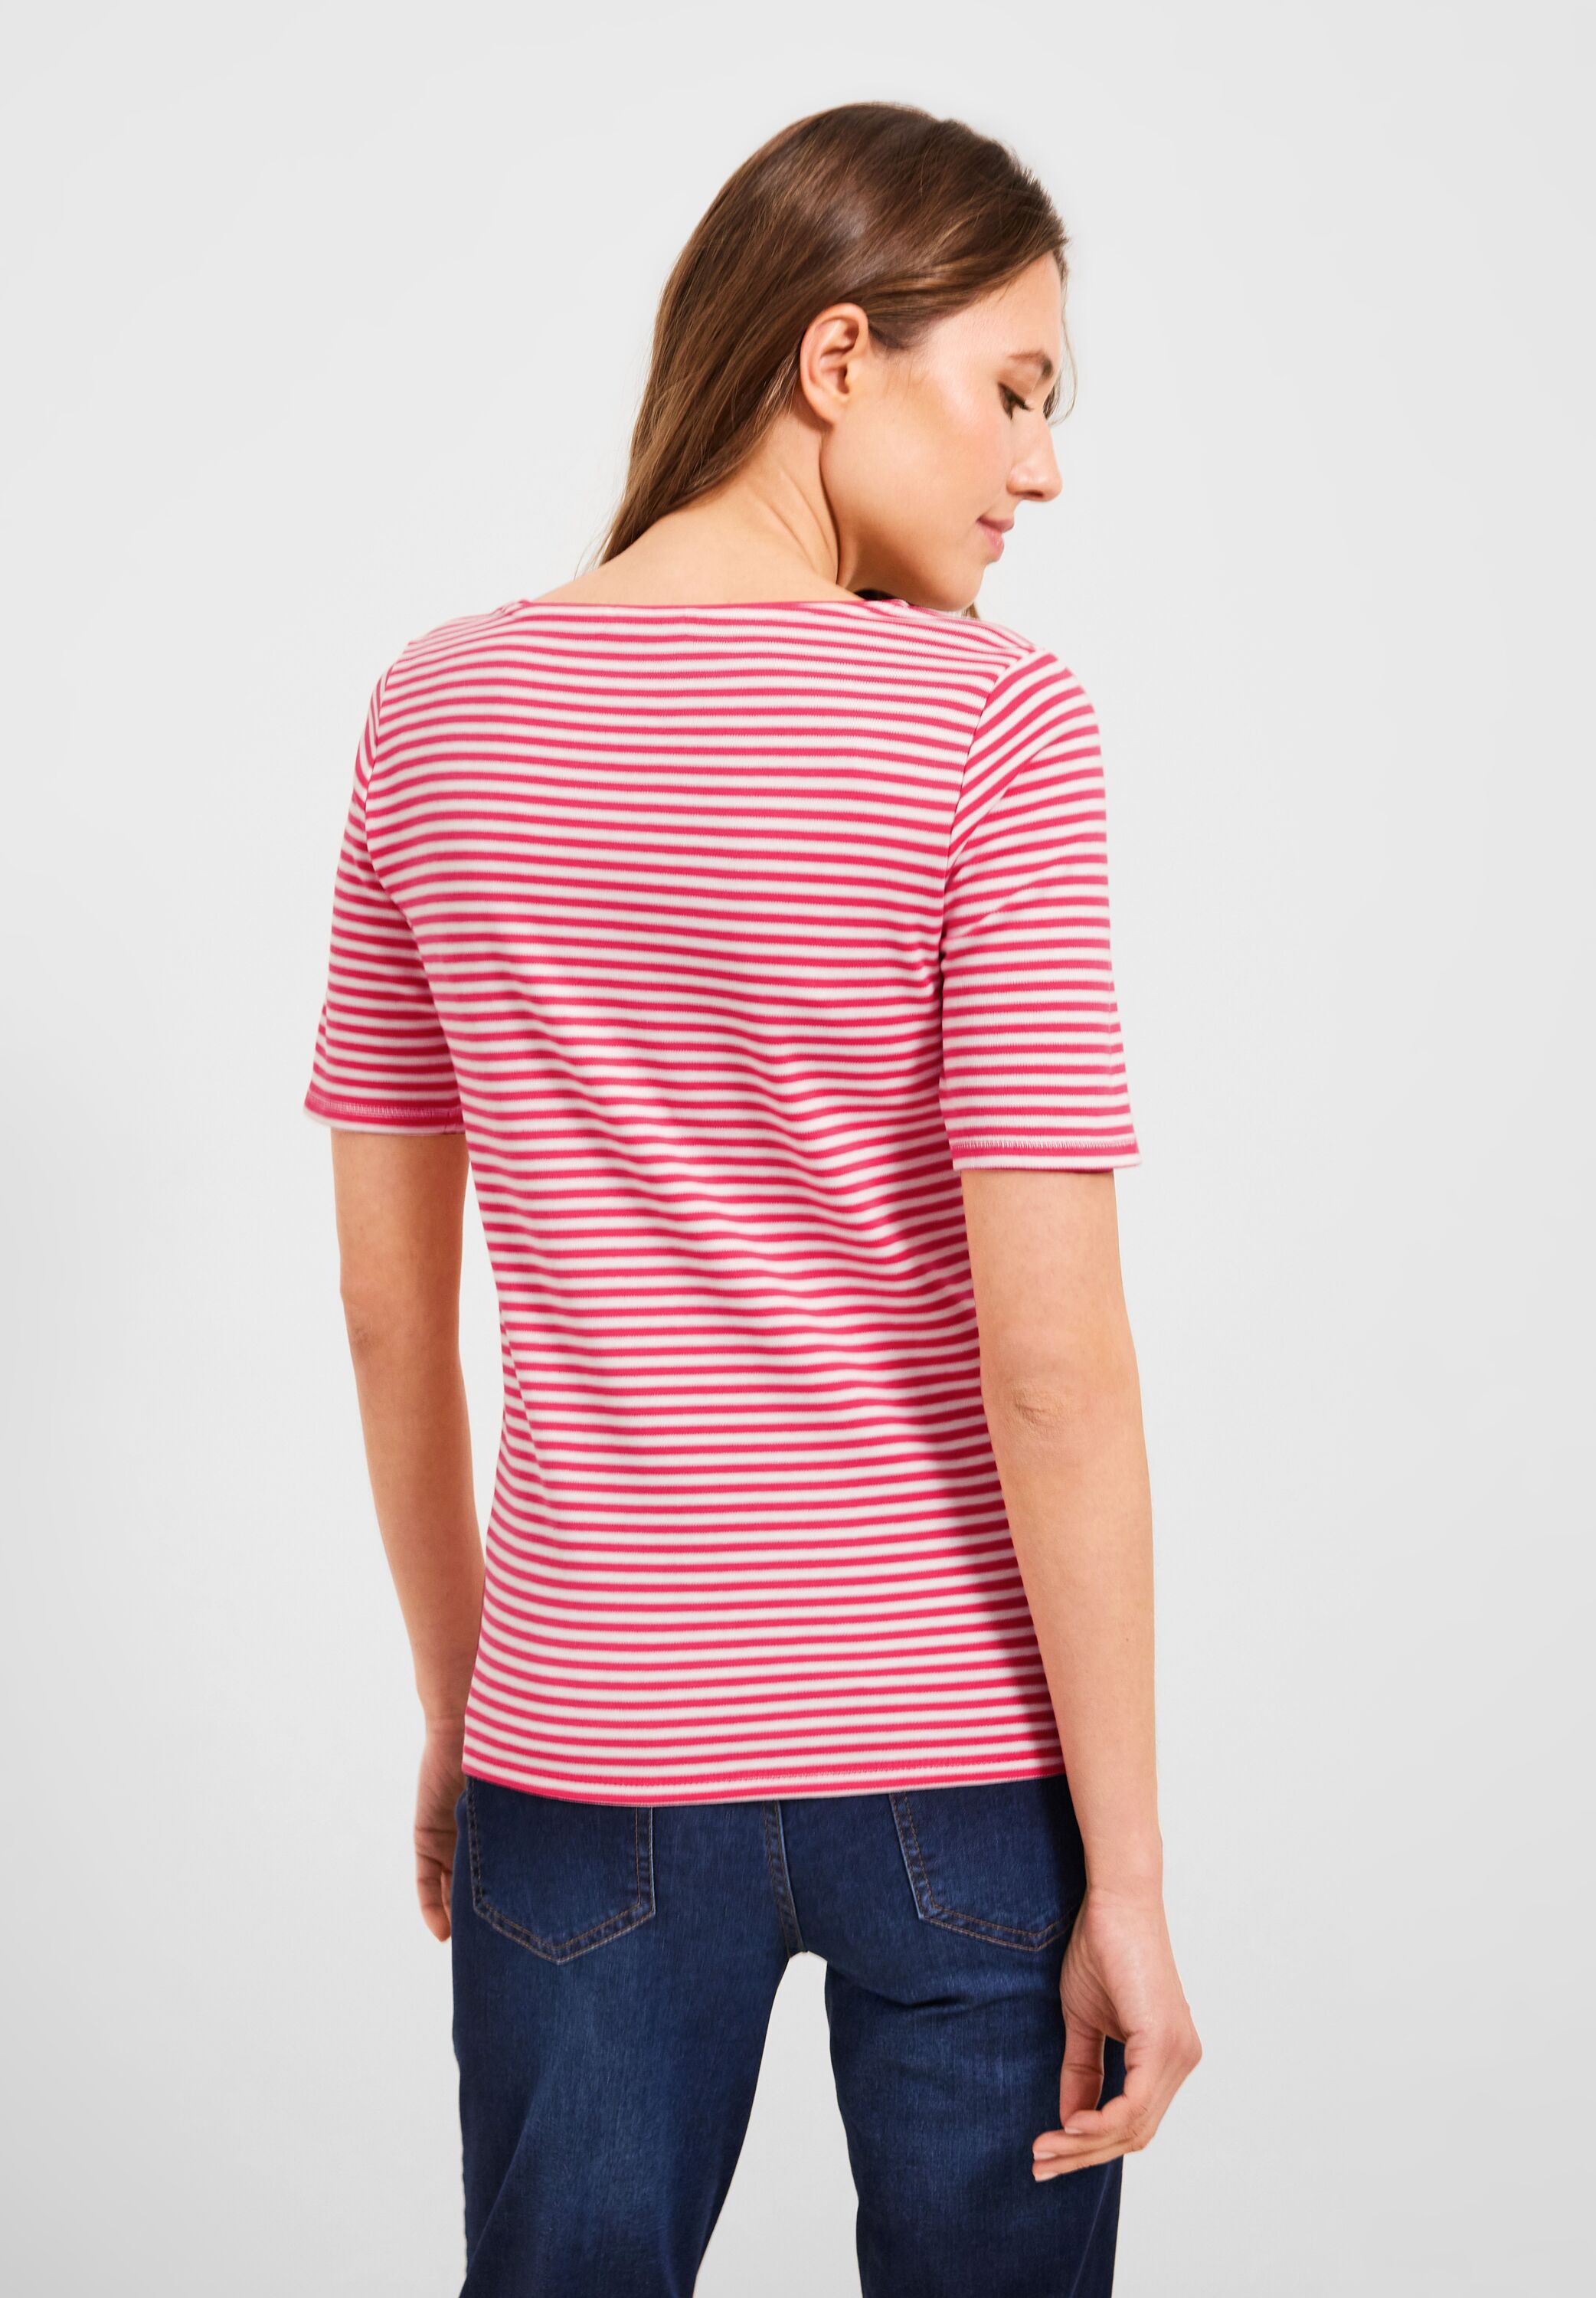 CECIL T-Shirt Lena in Strawberry SALE Red - CONCEPT B319591-24472 Mode reduziert im